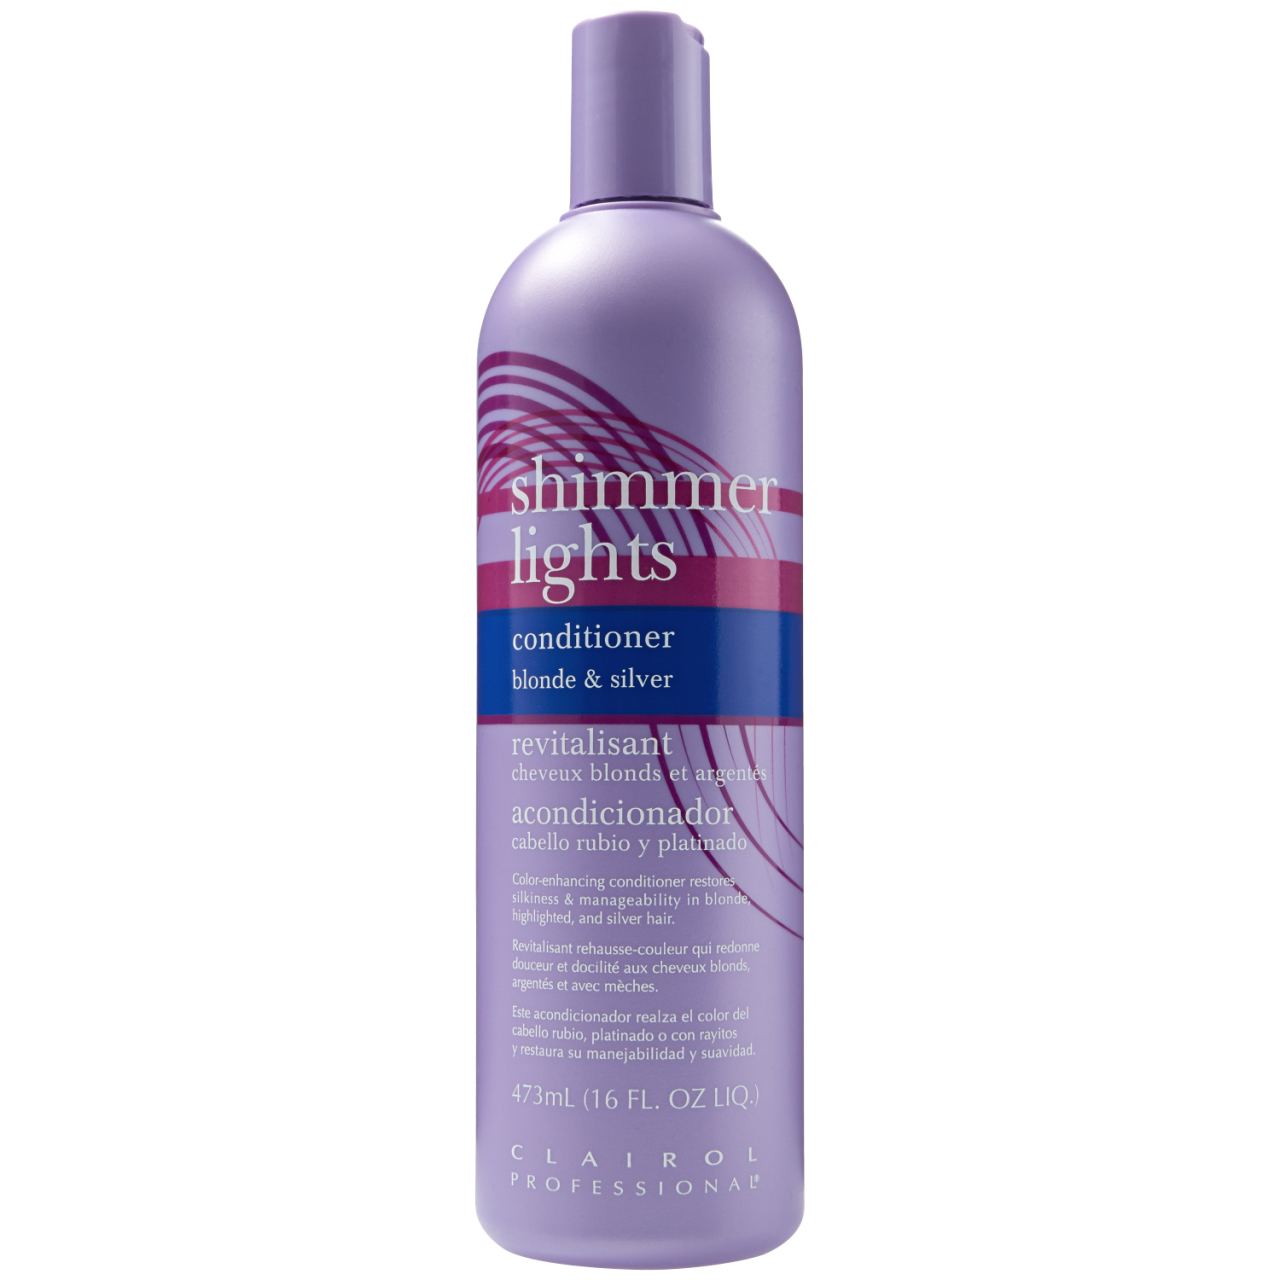 Clairol Professional - Shimmer Lights Conditioner 16oz